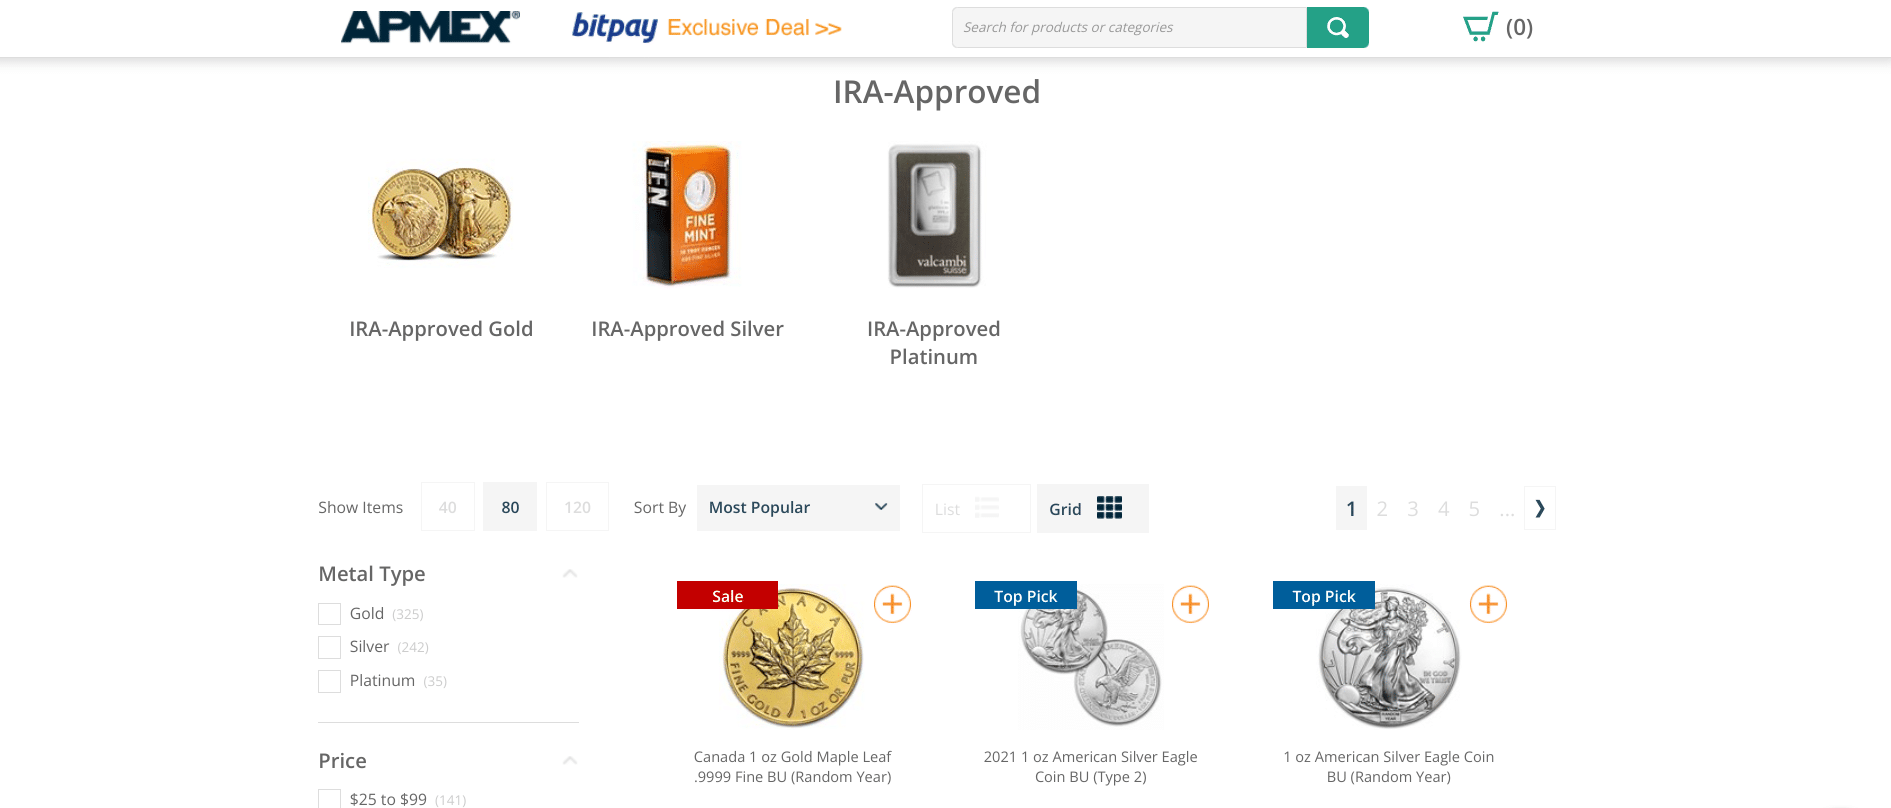 Screenshot of APMEX's IRA-eligible products